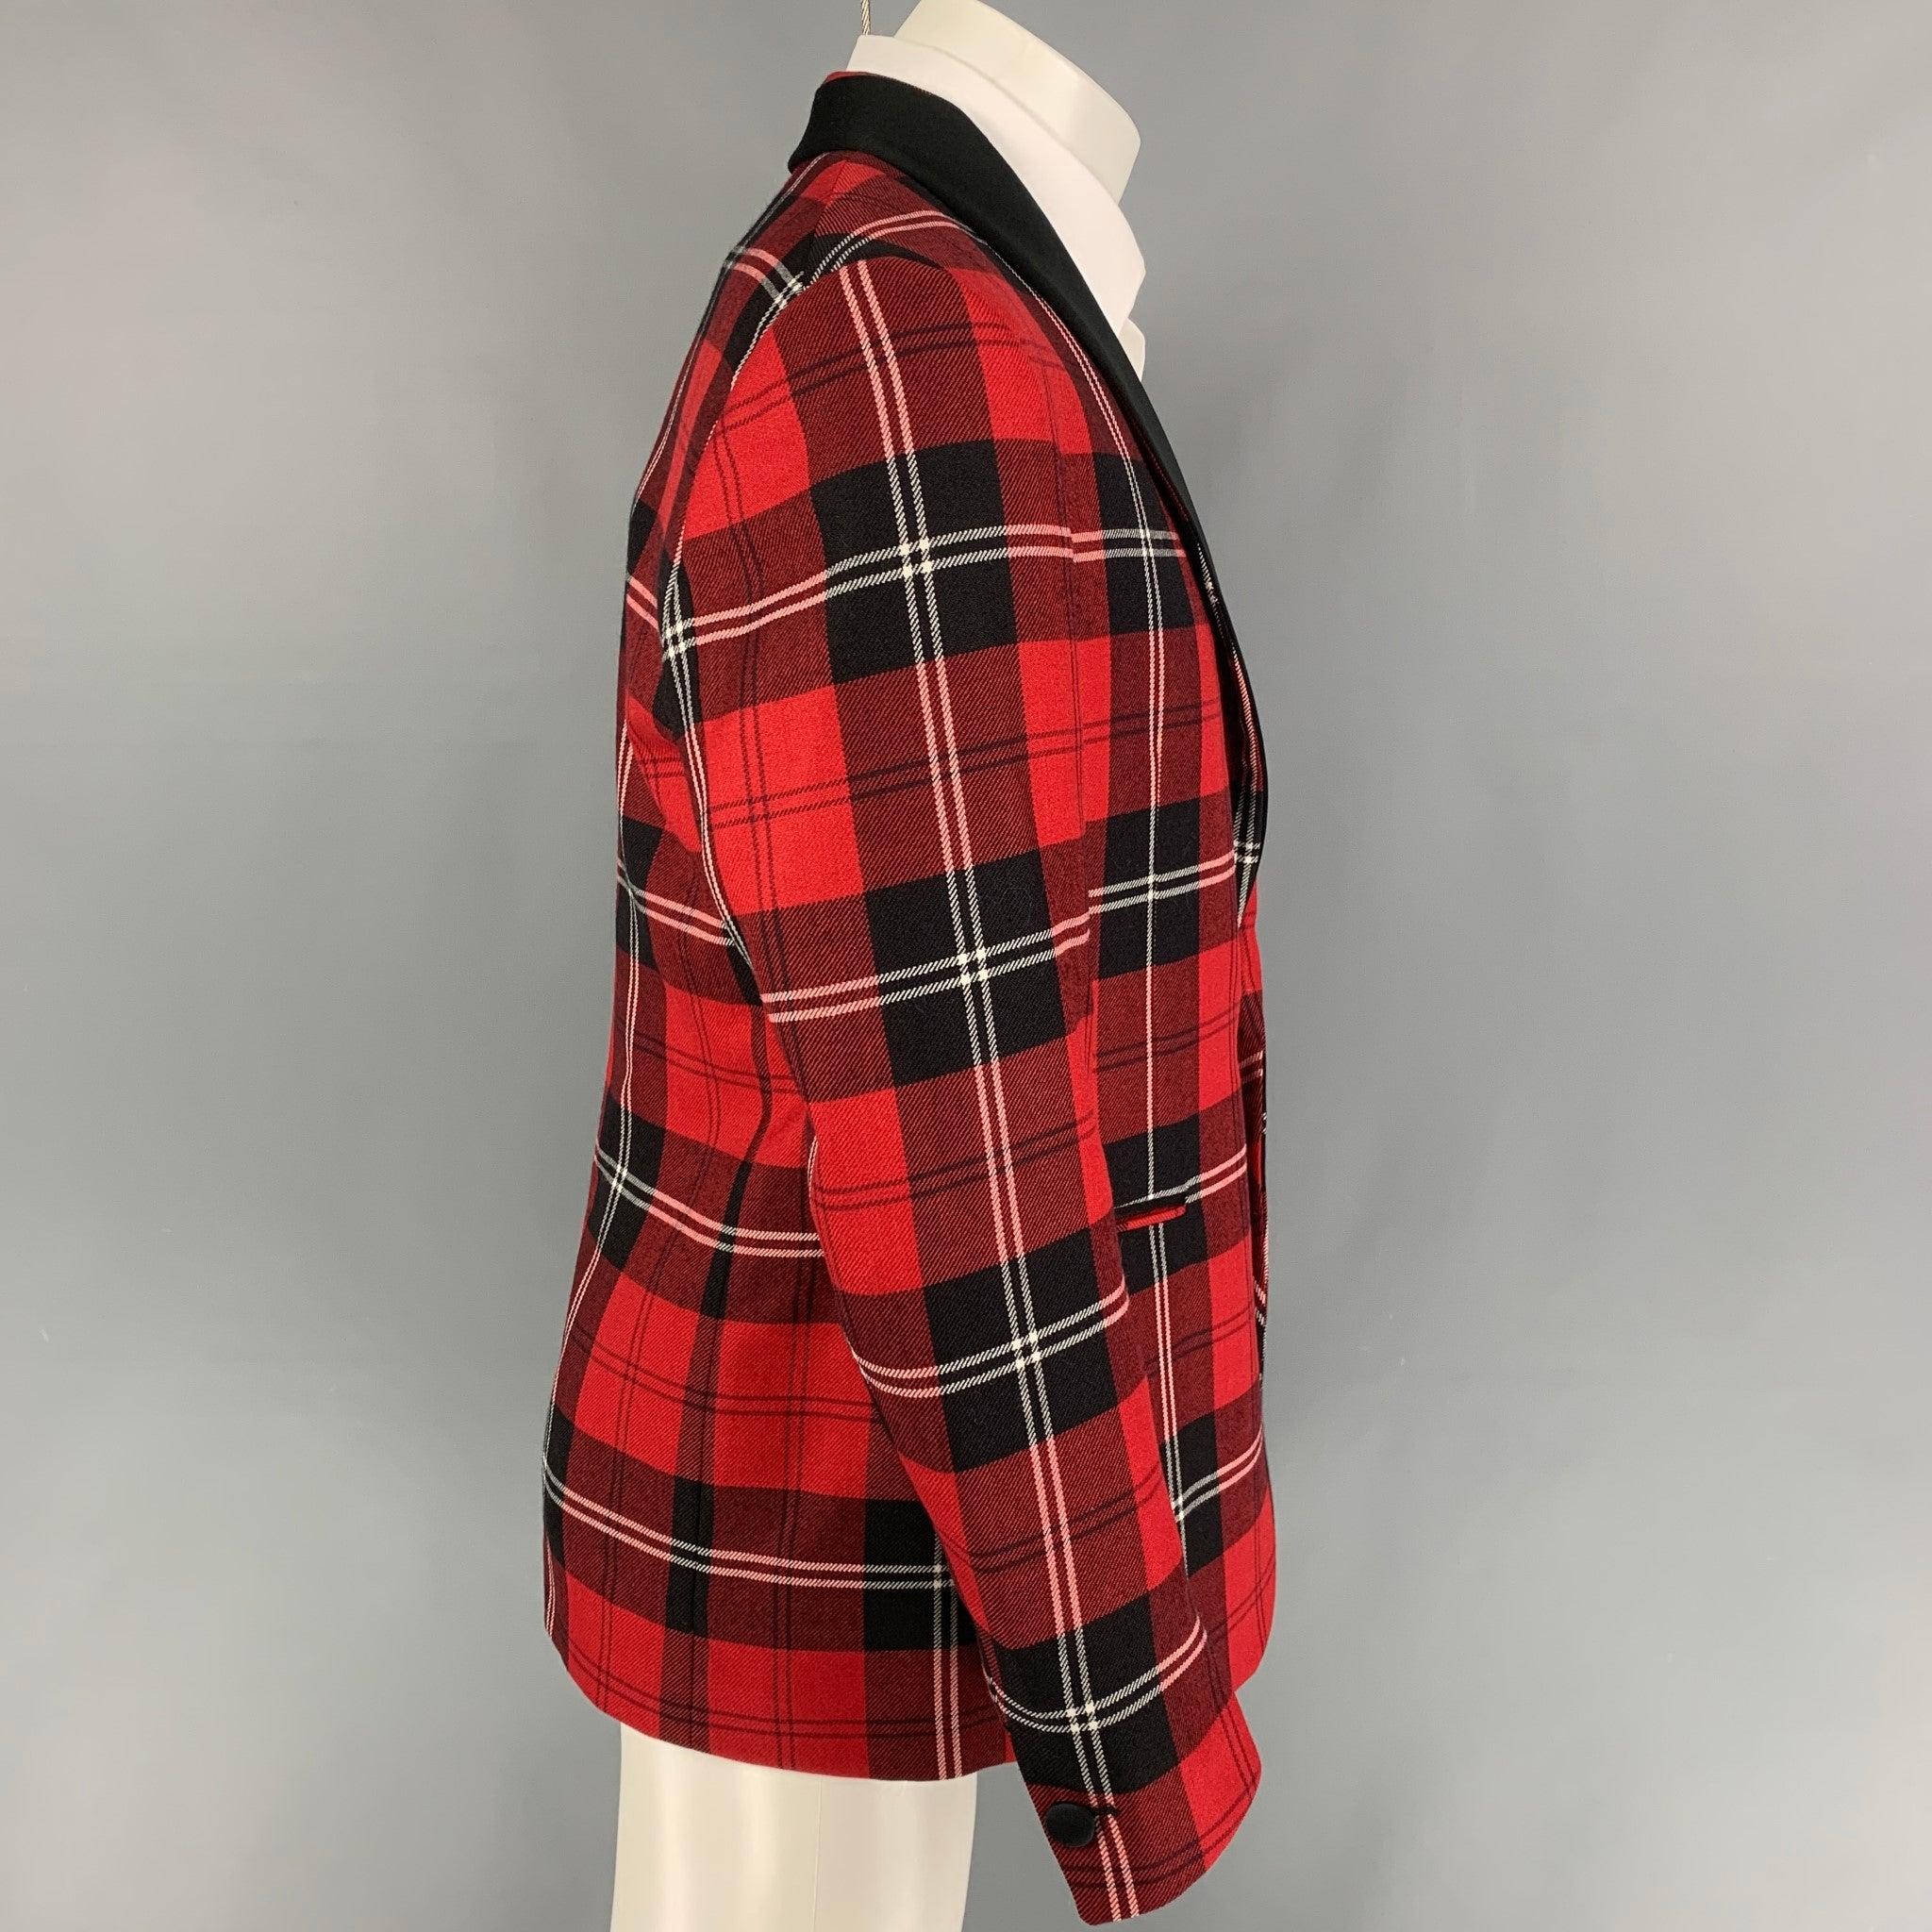 VERSACE sport coat comes in a red & black plaid wool with a full liner featuring a shawl collar, slit pockets, single back vent, and a single button closure. Made in Italy.
Excellent
Pre-Owned Condition. 

Marked:   50 

Measurements: 
 
Shoulder: